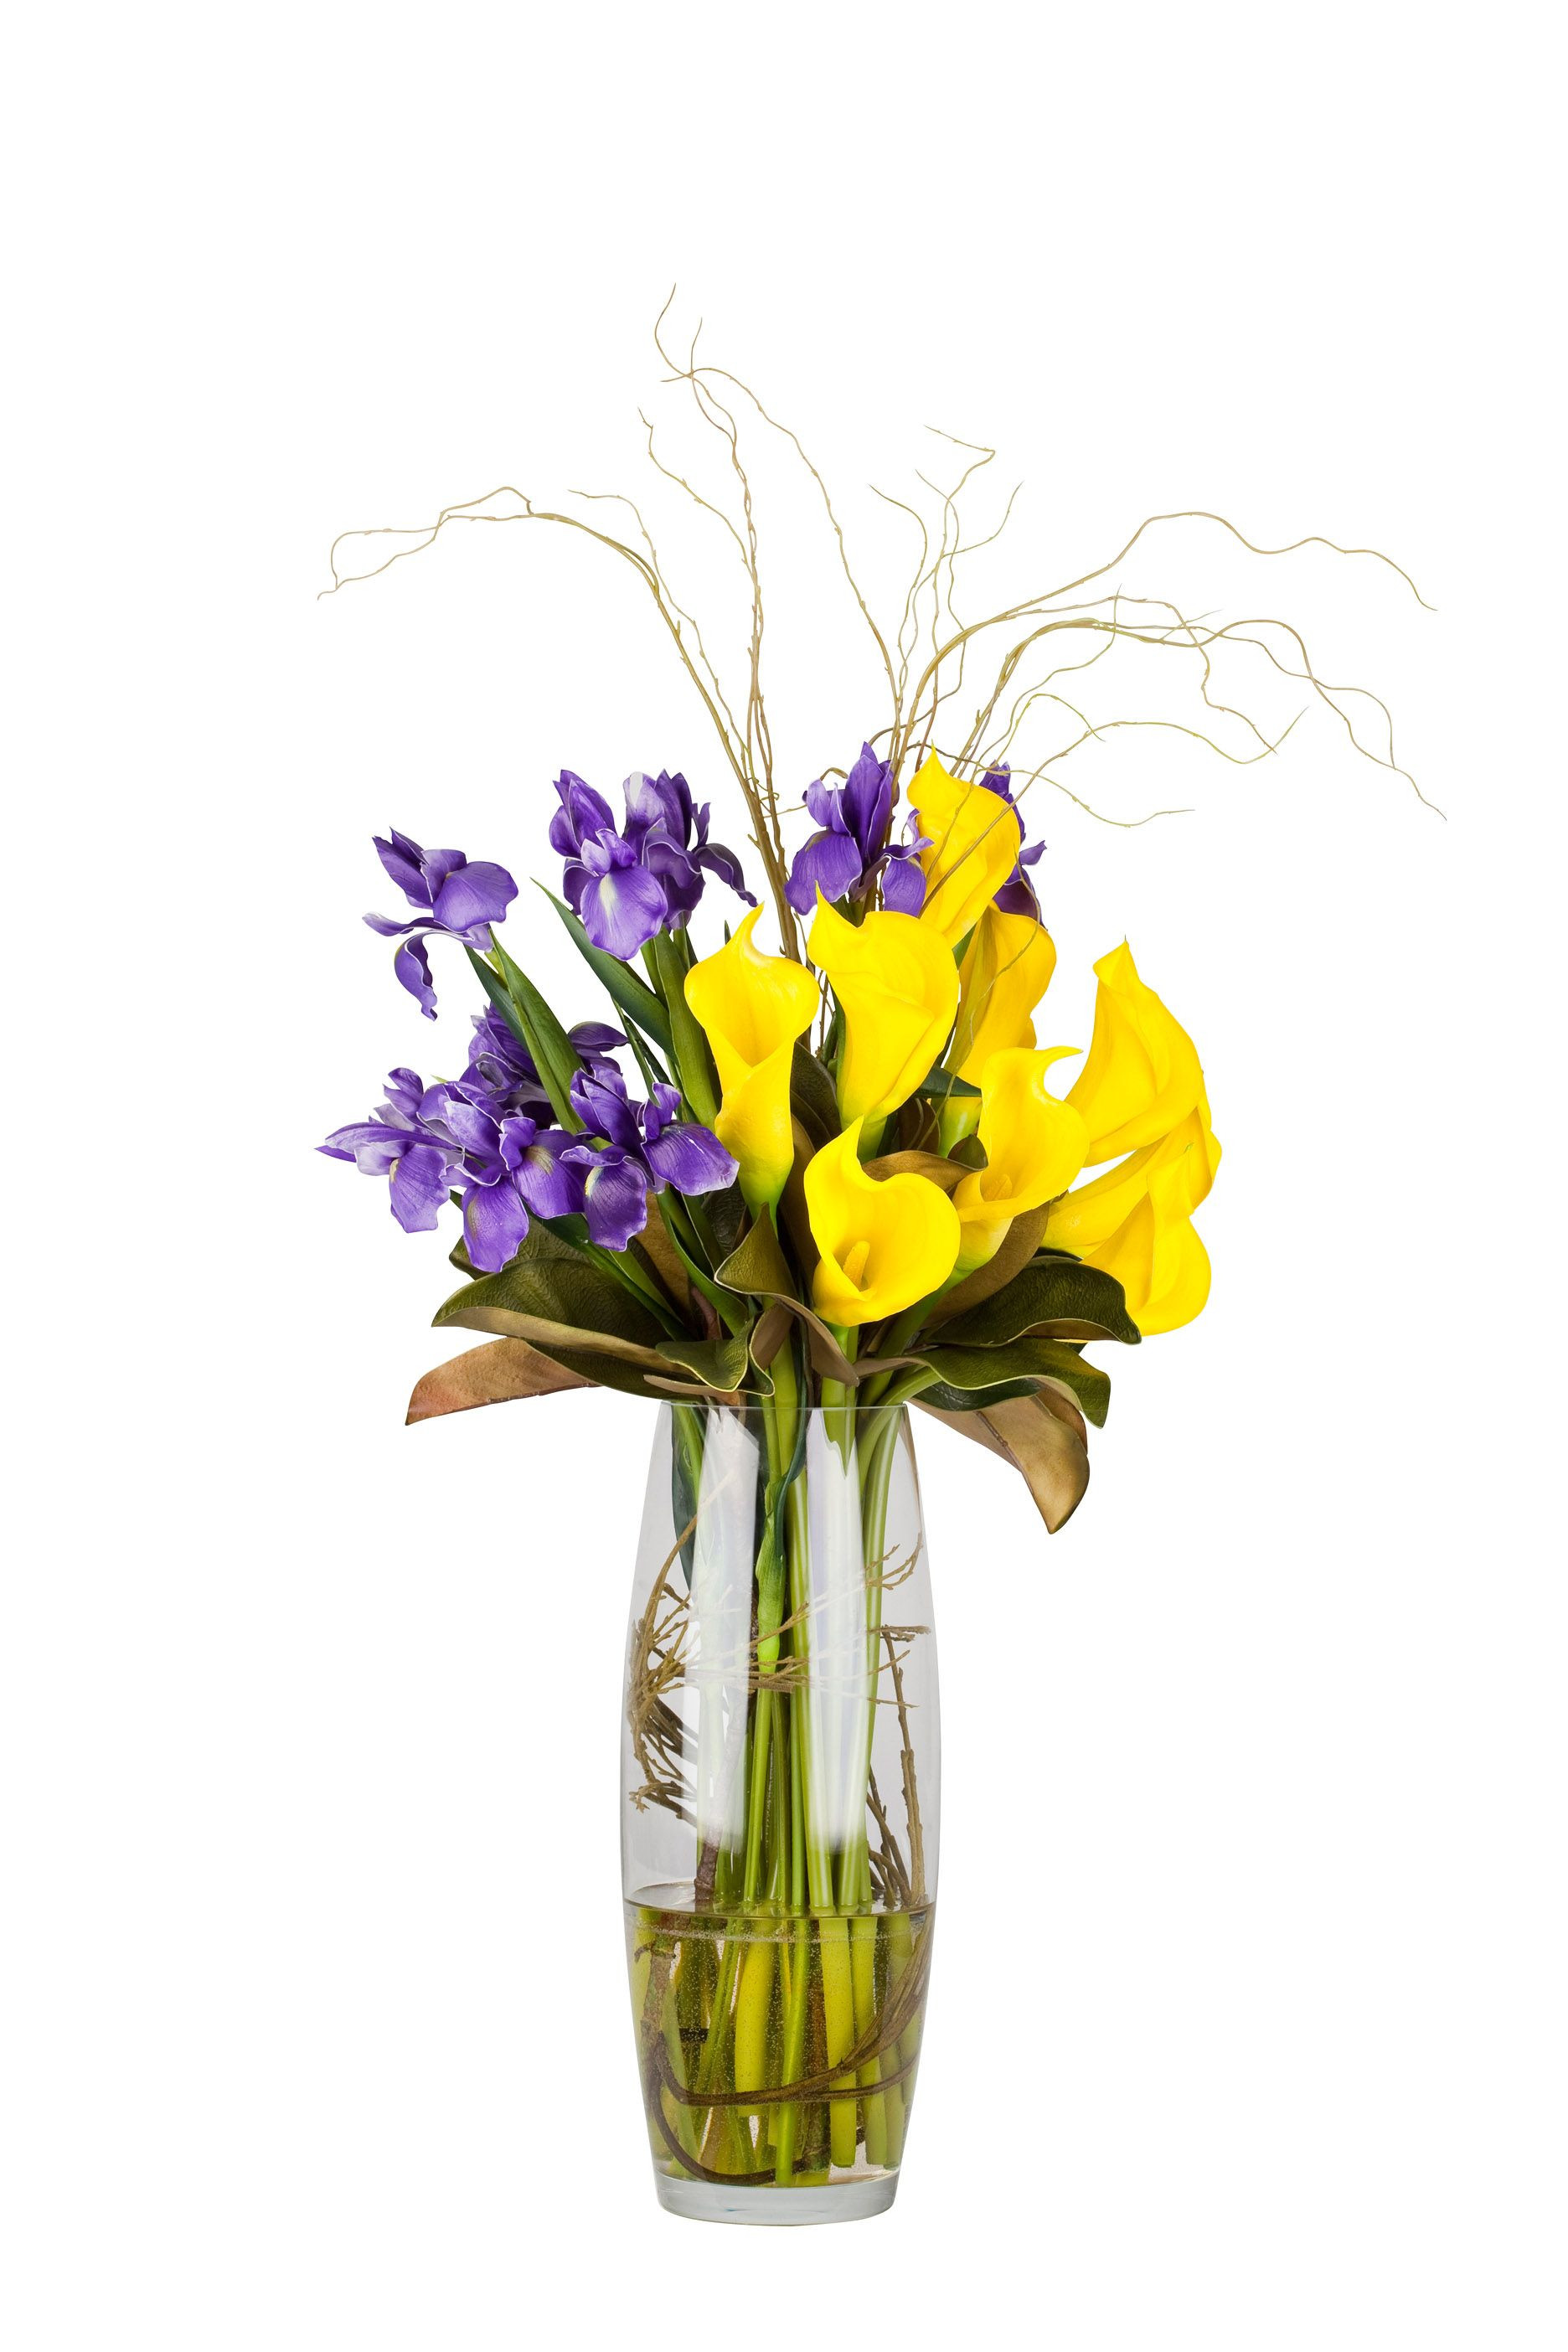 17 Ideal Ftd Cross Vase 2022 free download ftd cross vase of the contrasting colours make this arrangement pop love irises and intended for the contrasting colours make this arrangement pop love irises and calla lilies together corpo